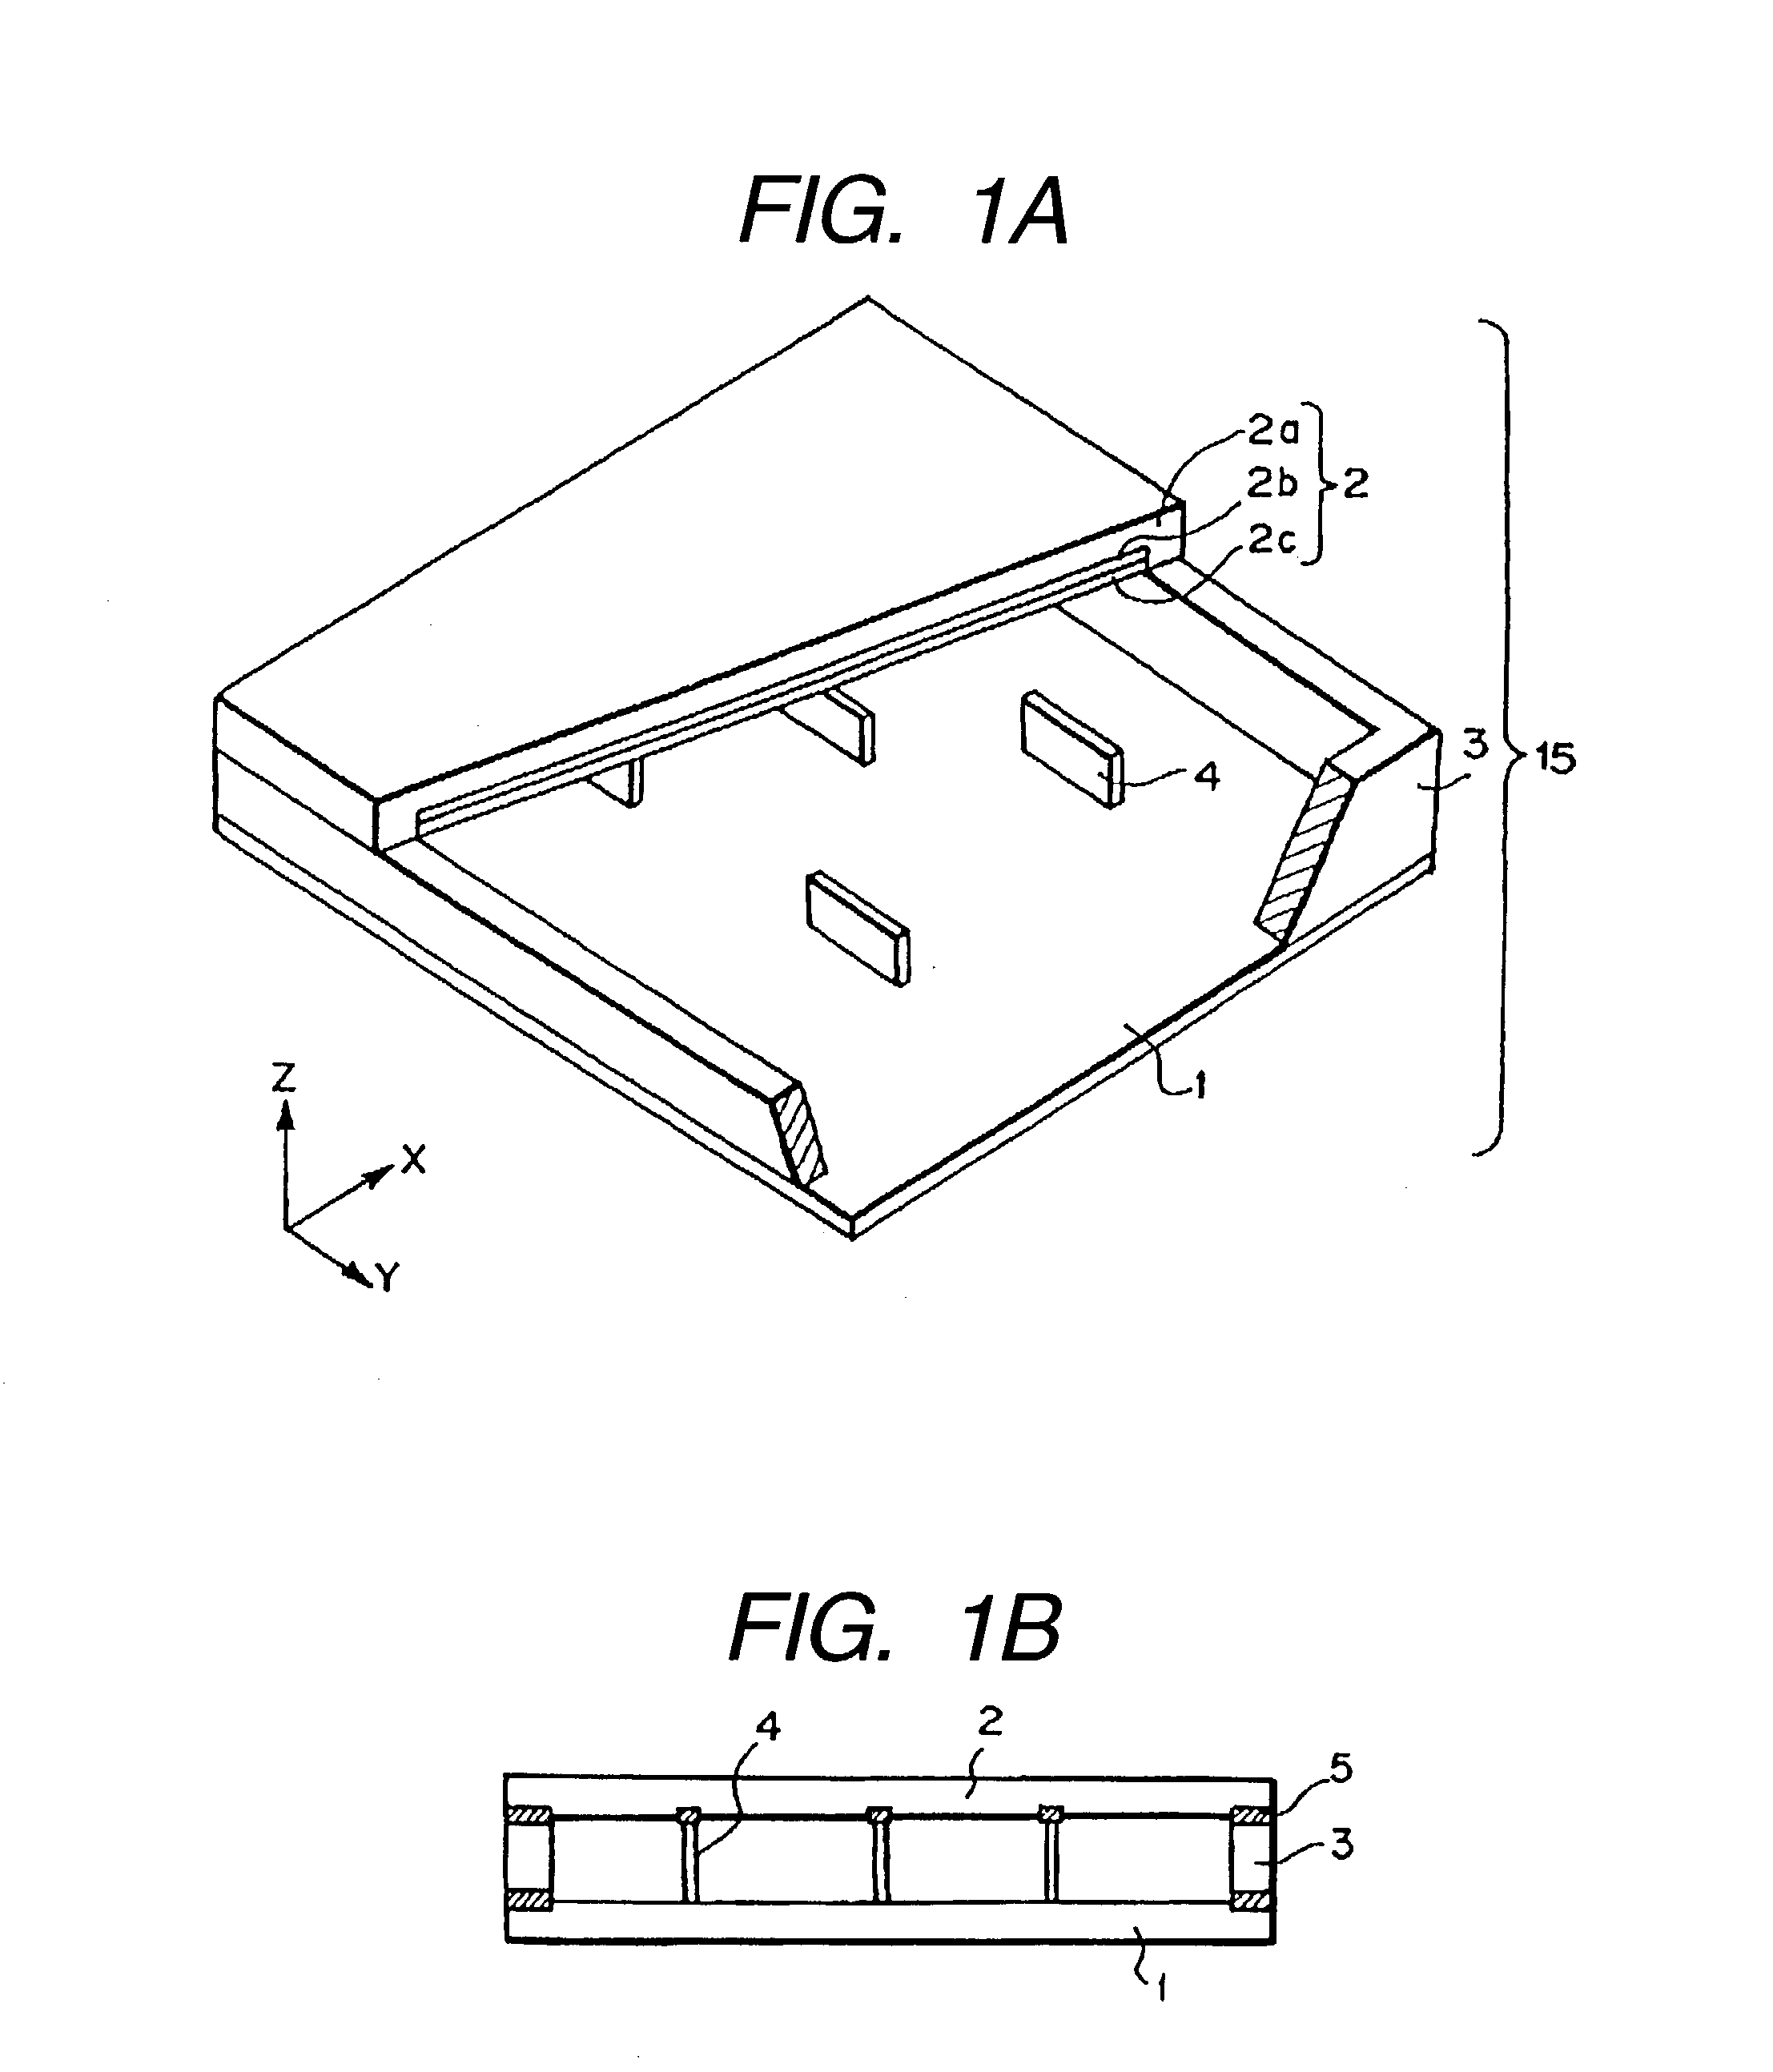 Image display apparatus, disassembly processing method therefor, and component recovery method